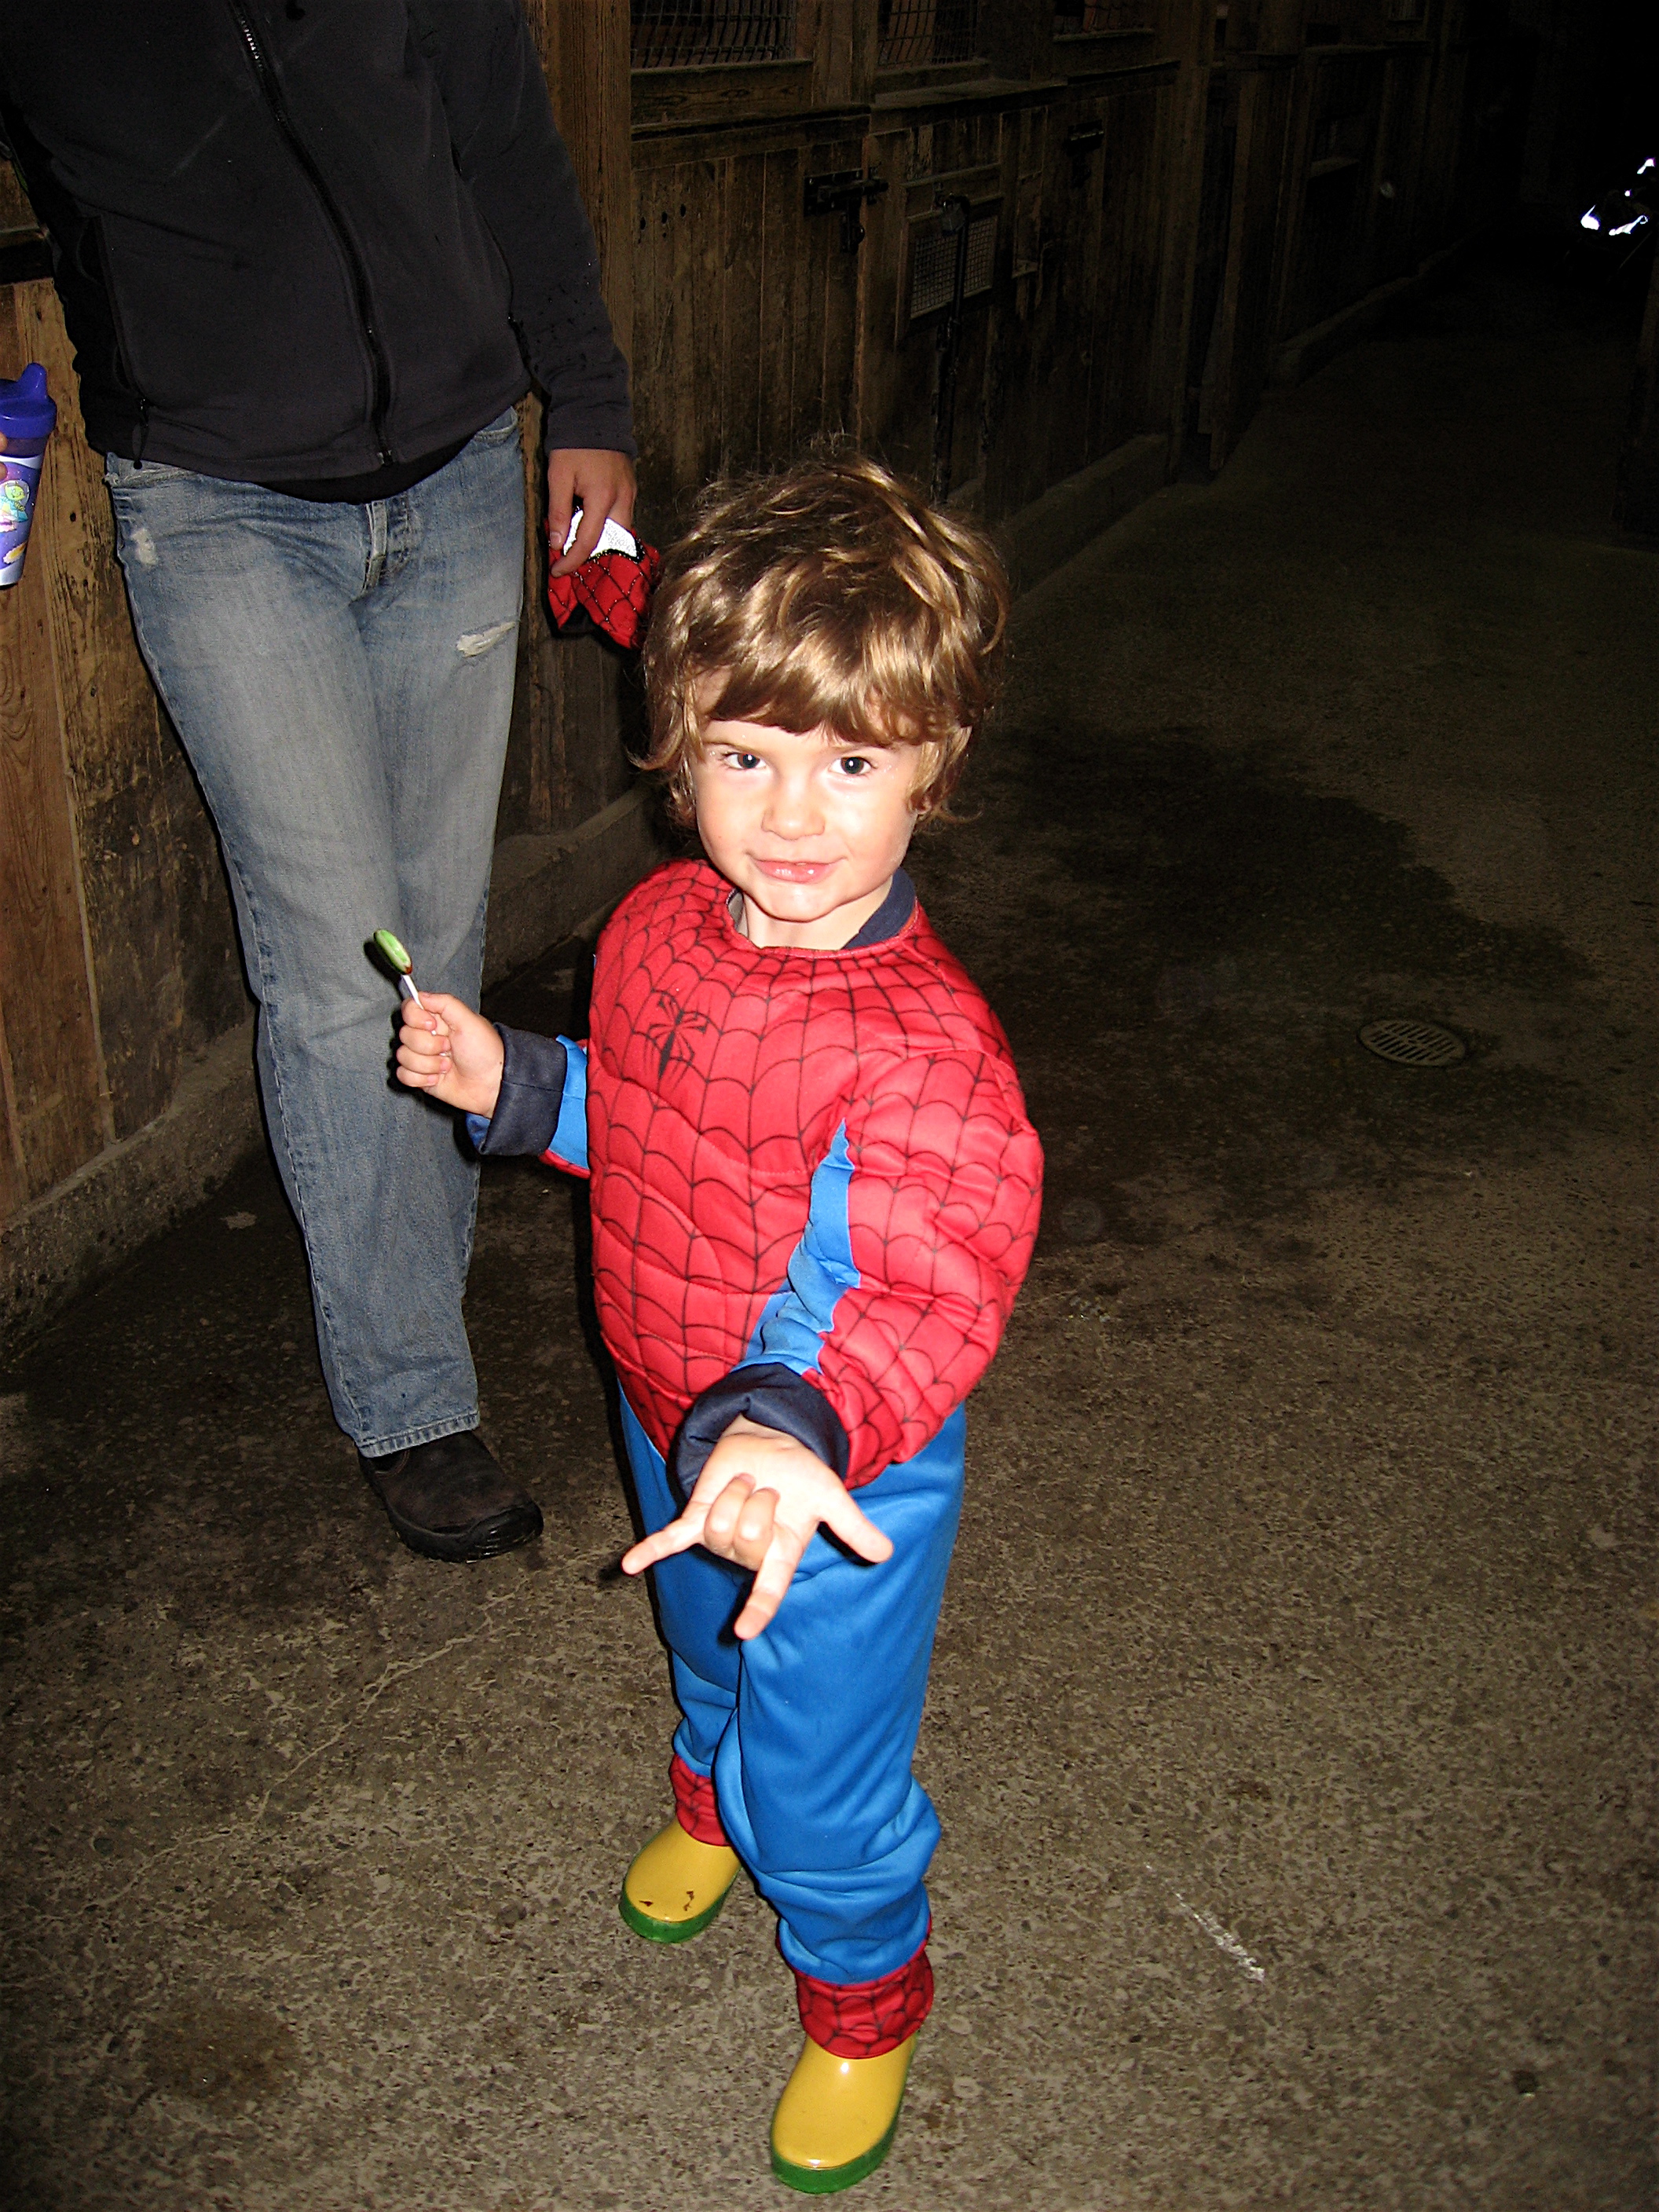 Young boy in a Spiderman costume